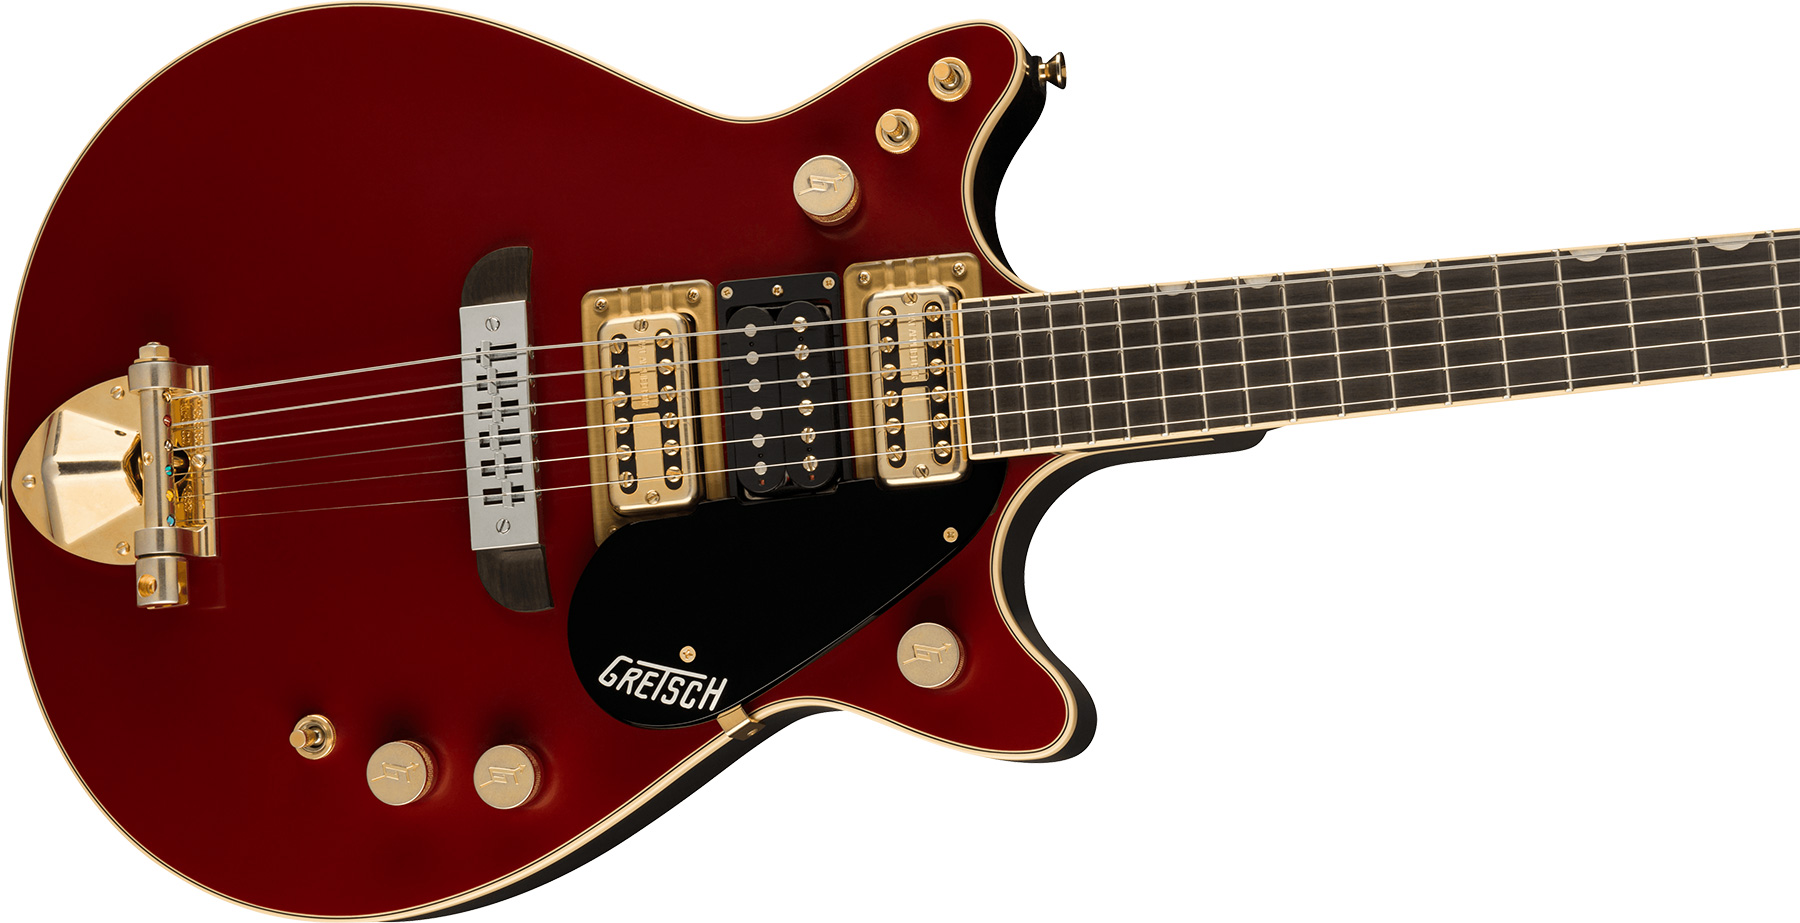 Gretsch Malcolm Young G6131g-my-rb Jet Ltd Signature 3h Ht Eb - Vintage Firebird Red - Double Cut E-Gitarre - Variation 2